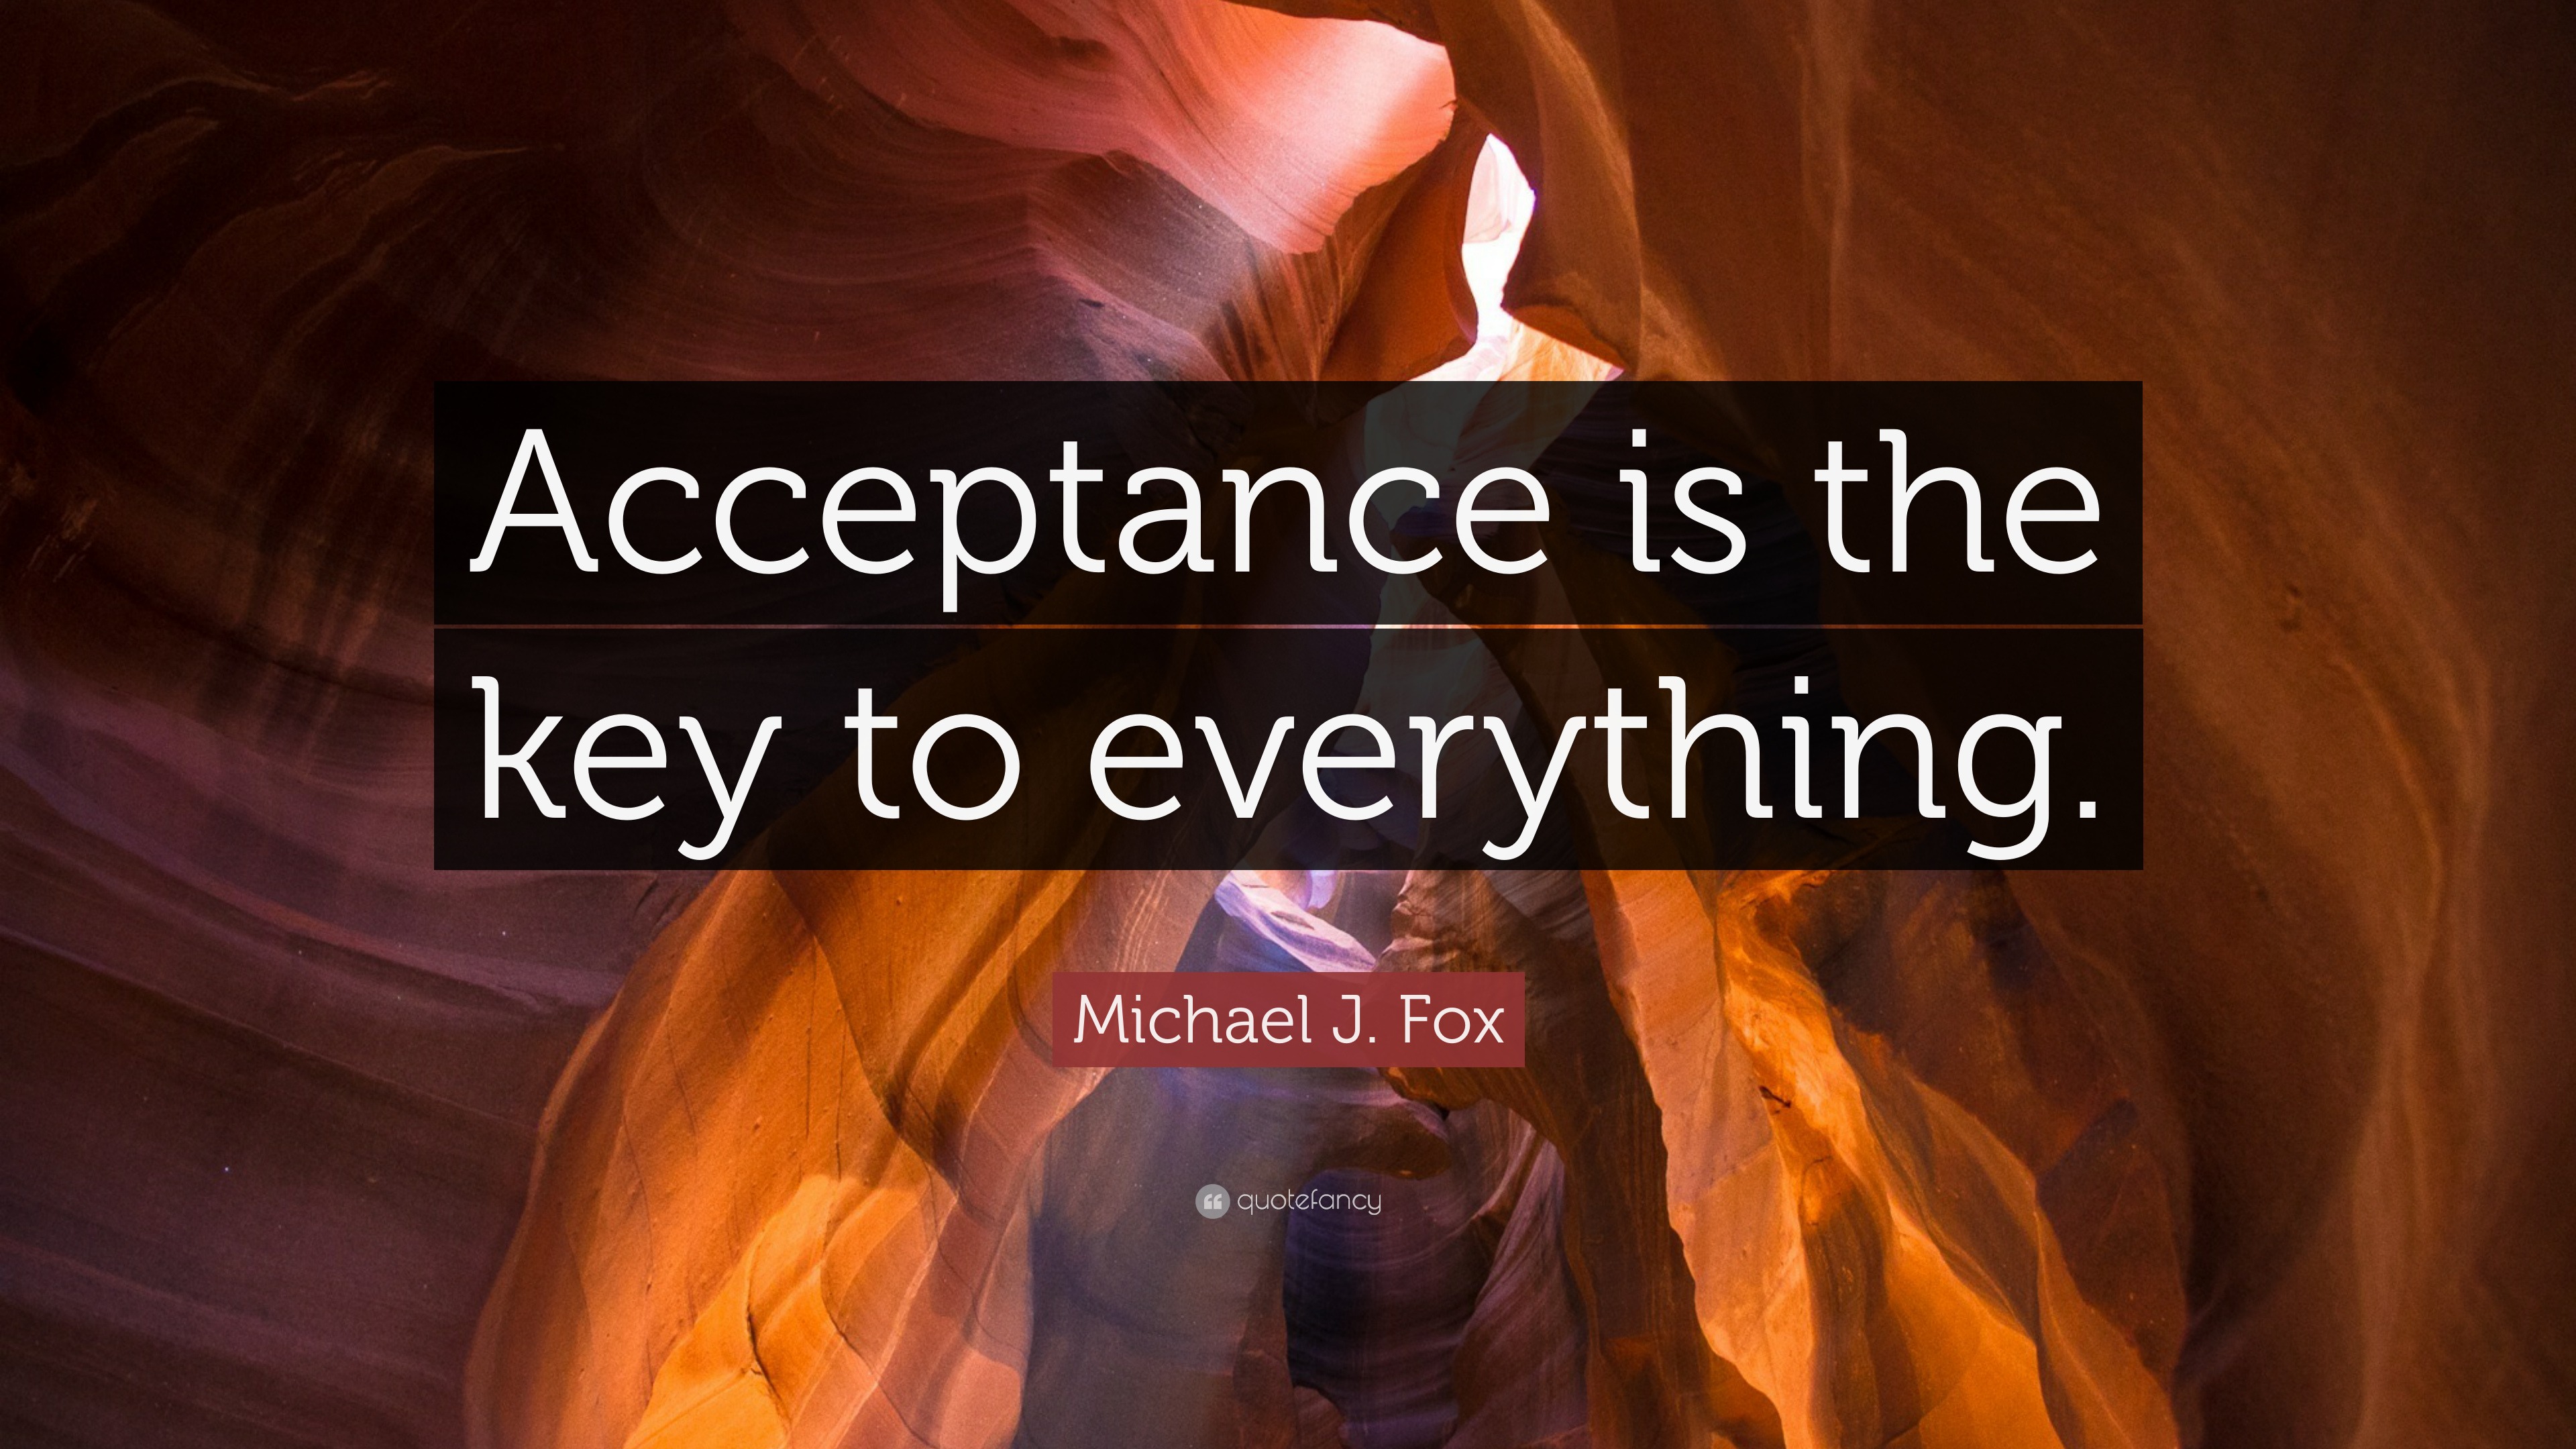 Michael J. Fox Quote “Acceptance is the key to everything.”